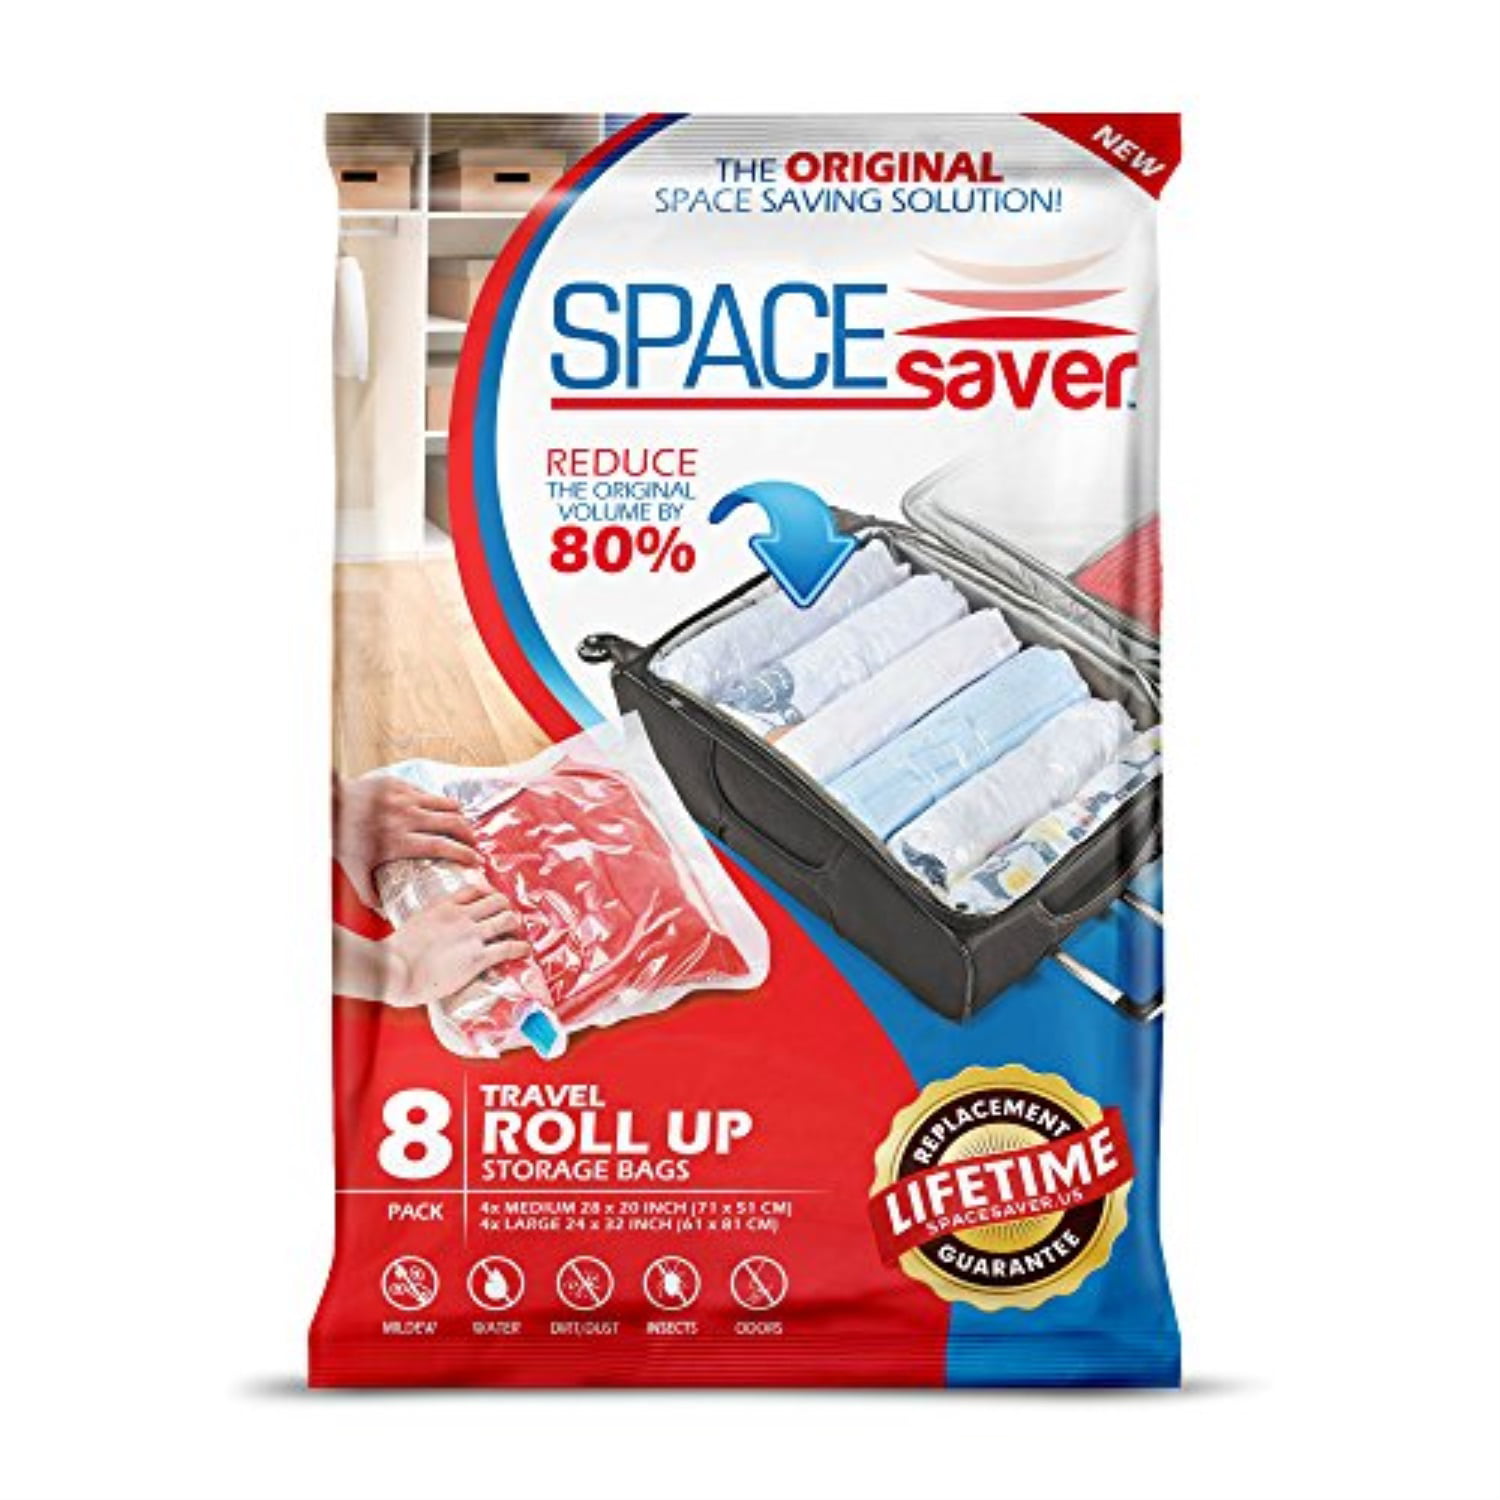 Travel Space Saver Compression Storage Bags Hand Rolling Vacuum Packing Sack 